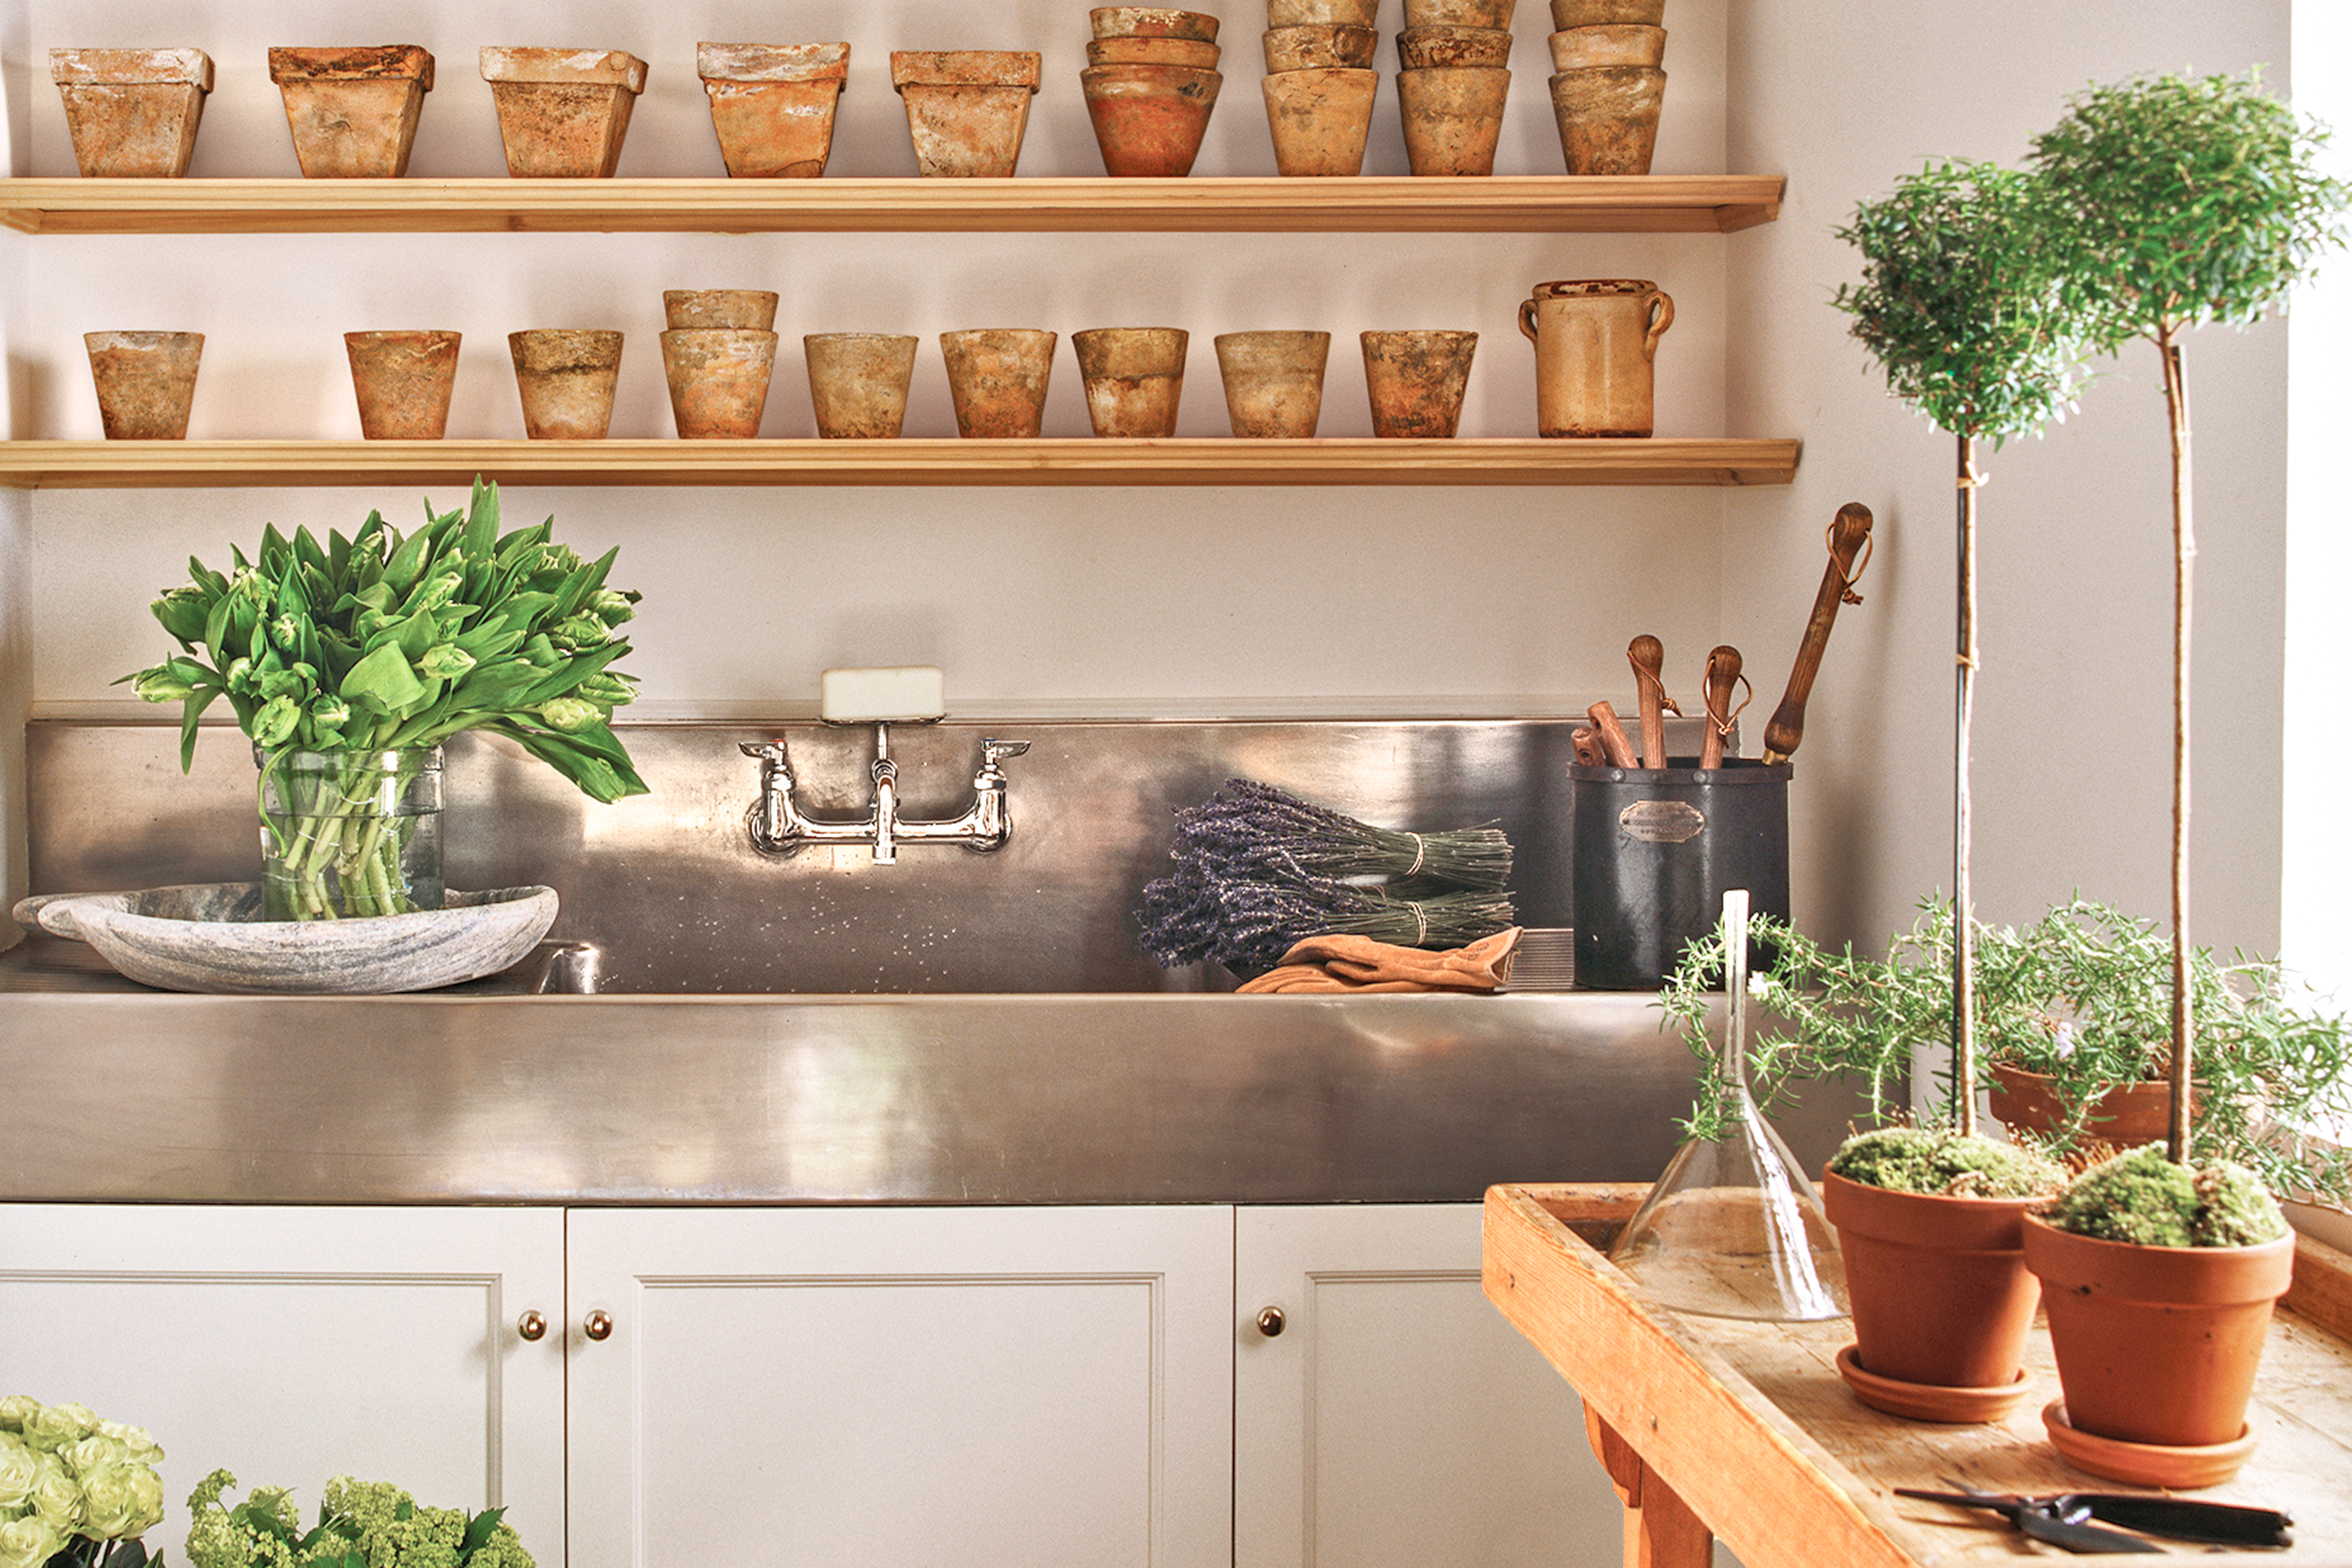 Potting room with a stainless steel sink and terracotta pots on the walls